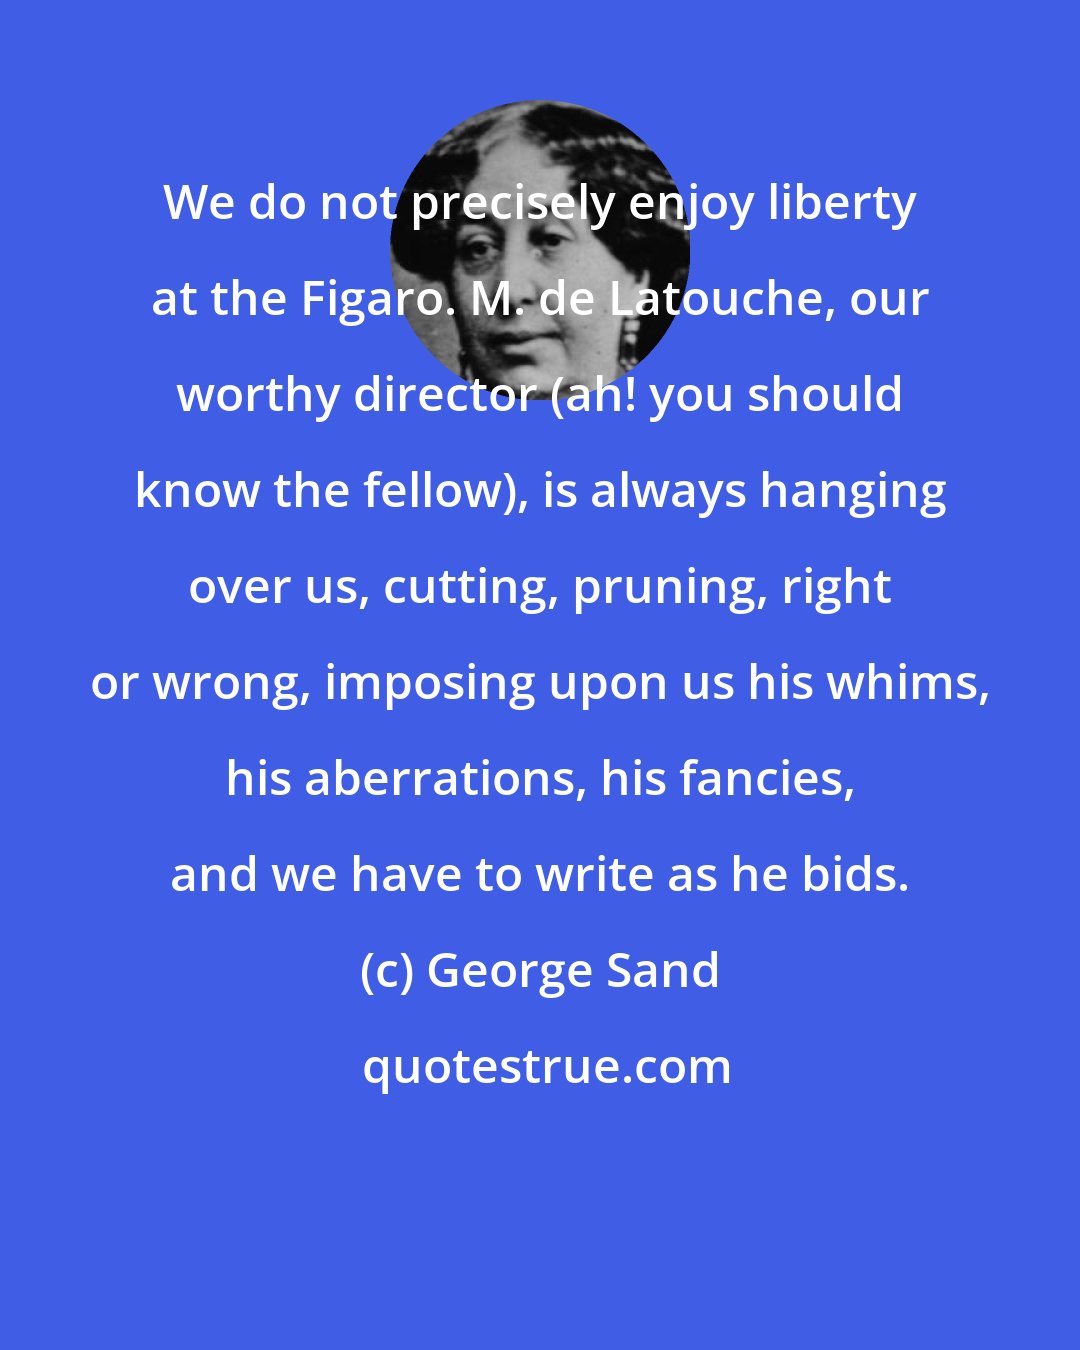 George Sand: We do not precisely enjoy liberty at the Figaro. M. de Latouche, our worthy director (ah! you should know the fellow), is always hanging over us, cutting, pruning, right or wrong, imposing upon us his whims, his aberrations, his fancies, and we have to write as he bids.